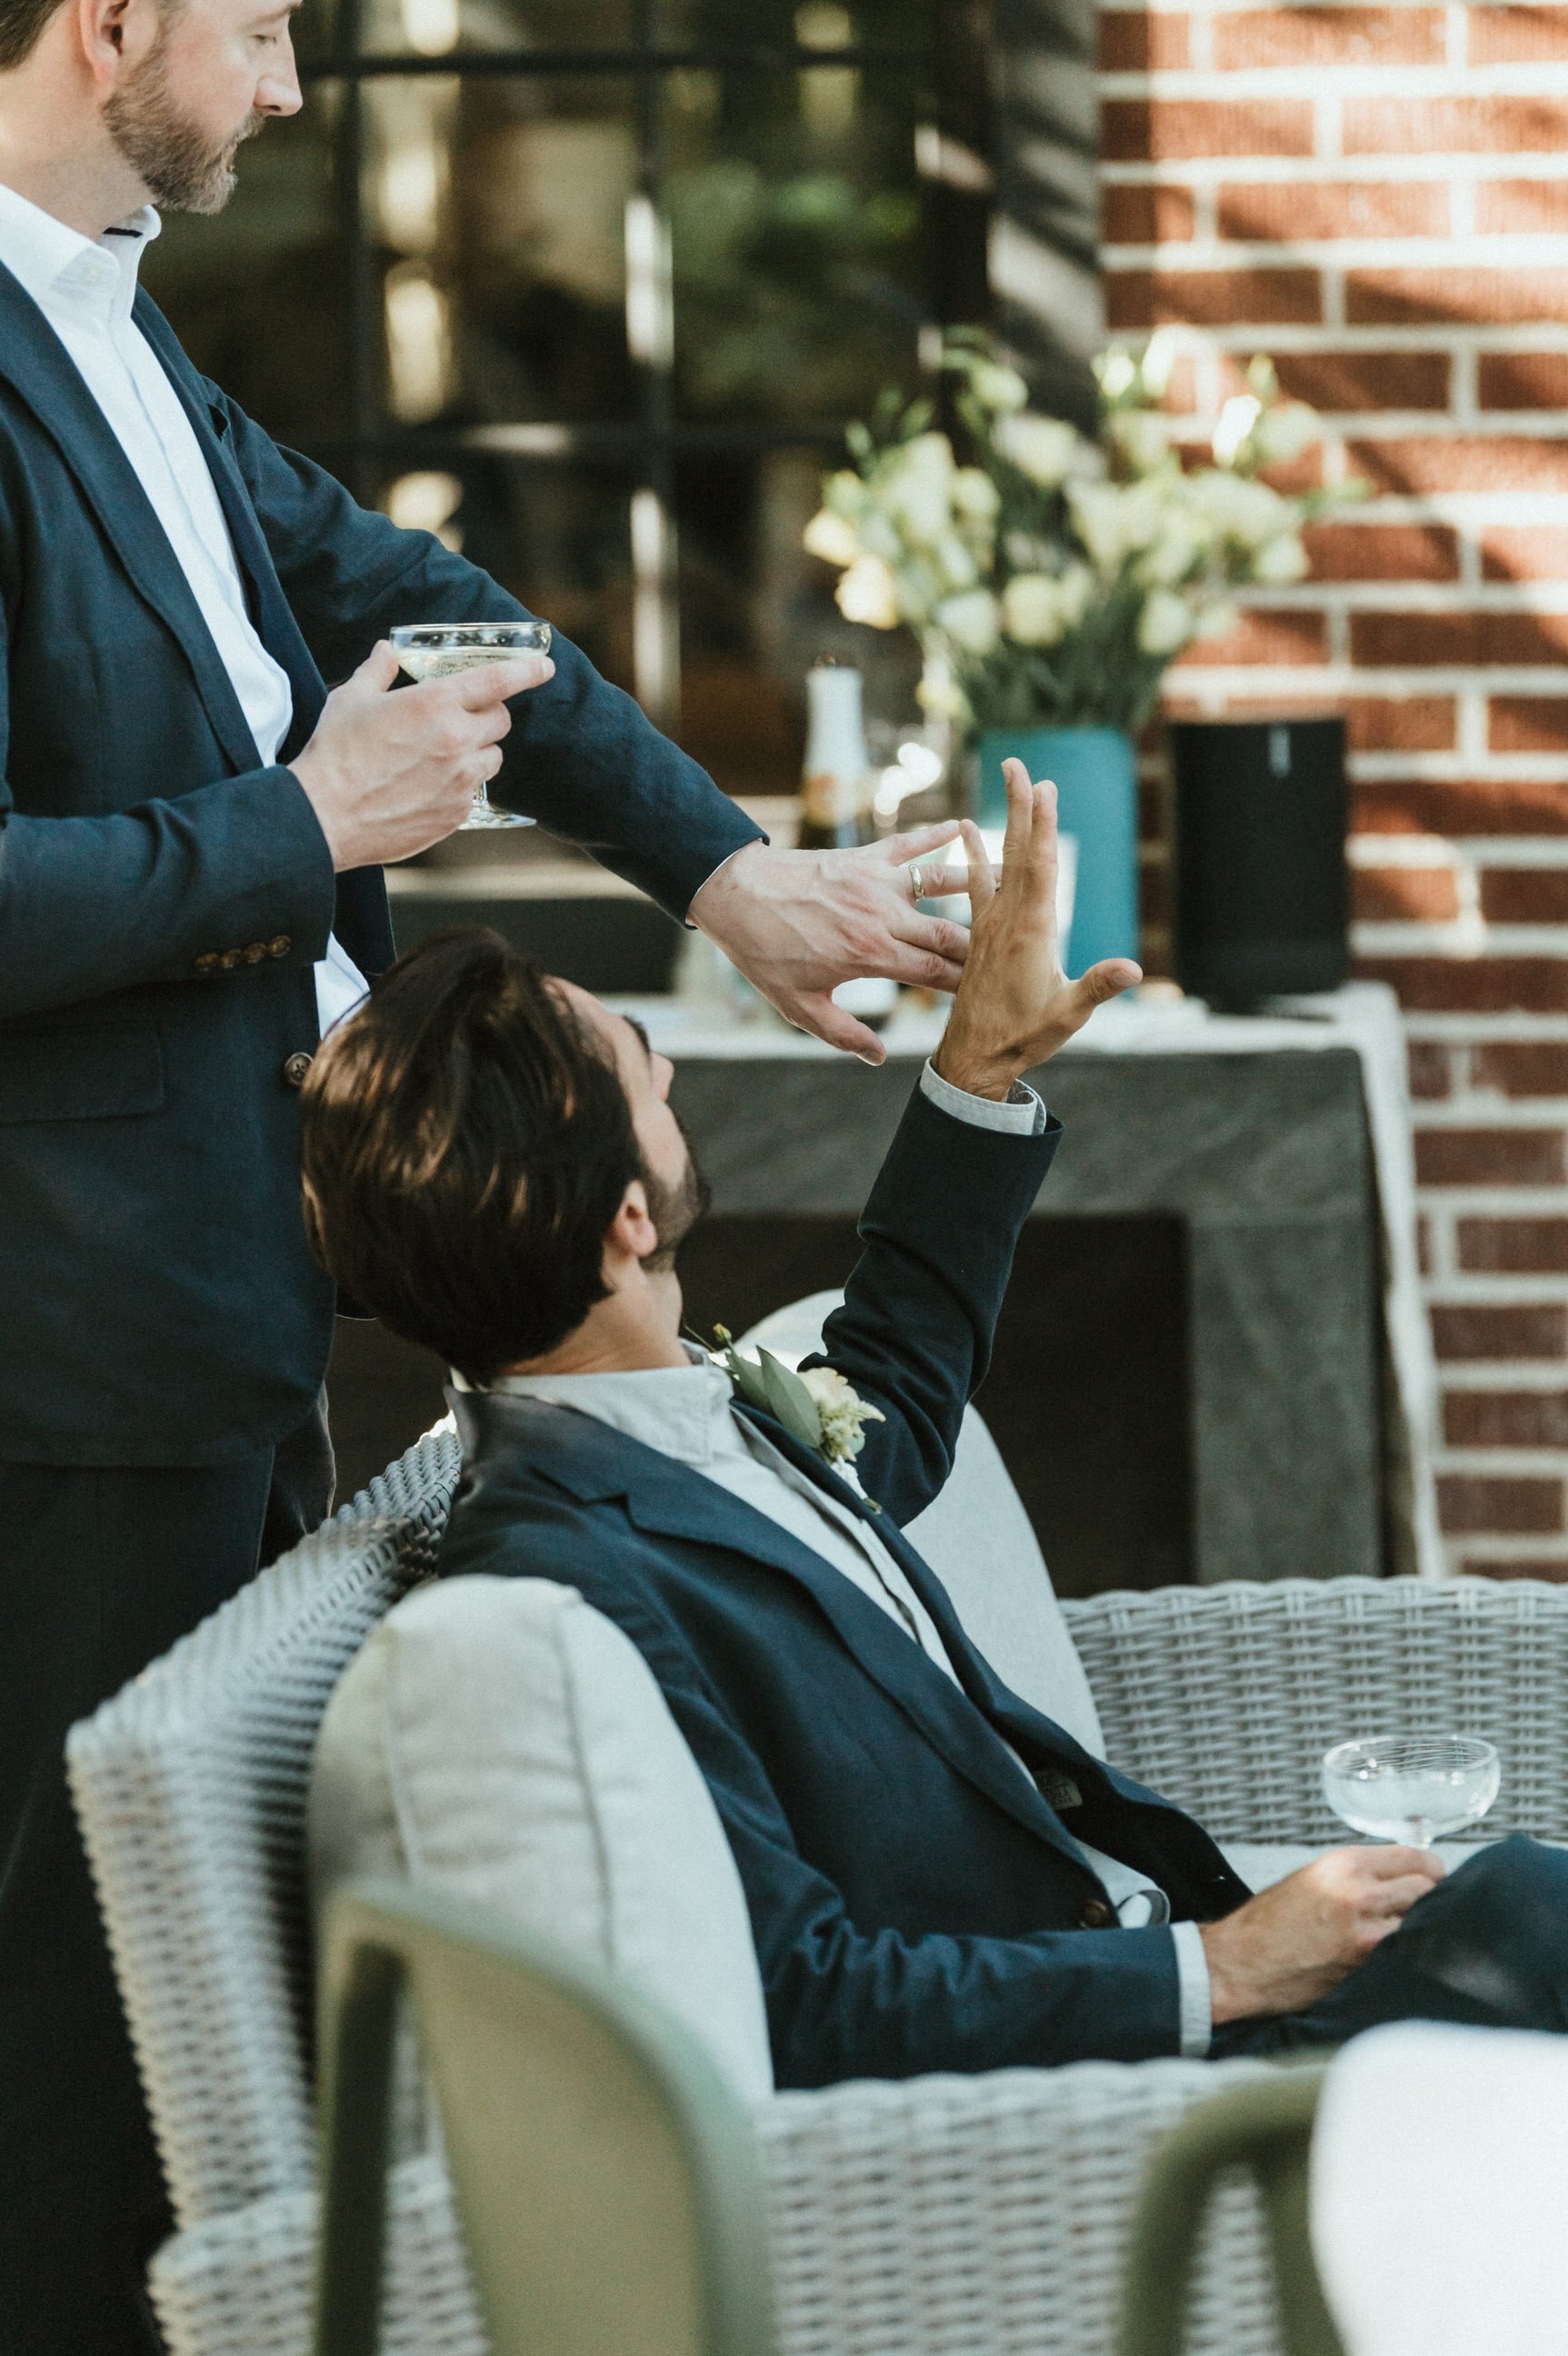 groom and brother showing rings on ring fingers to each other